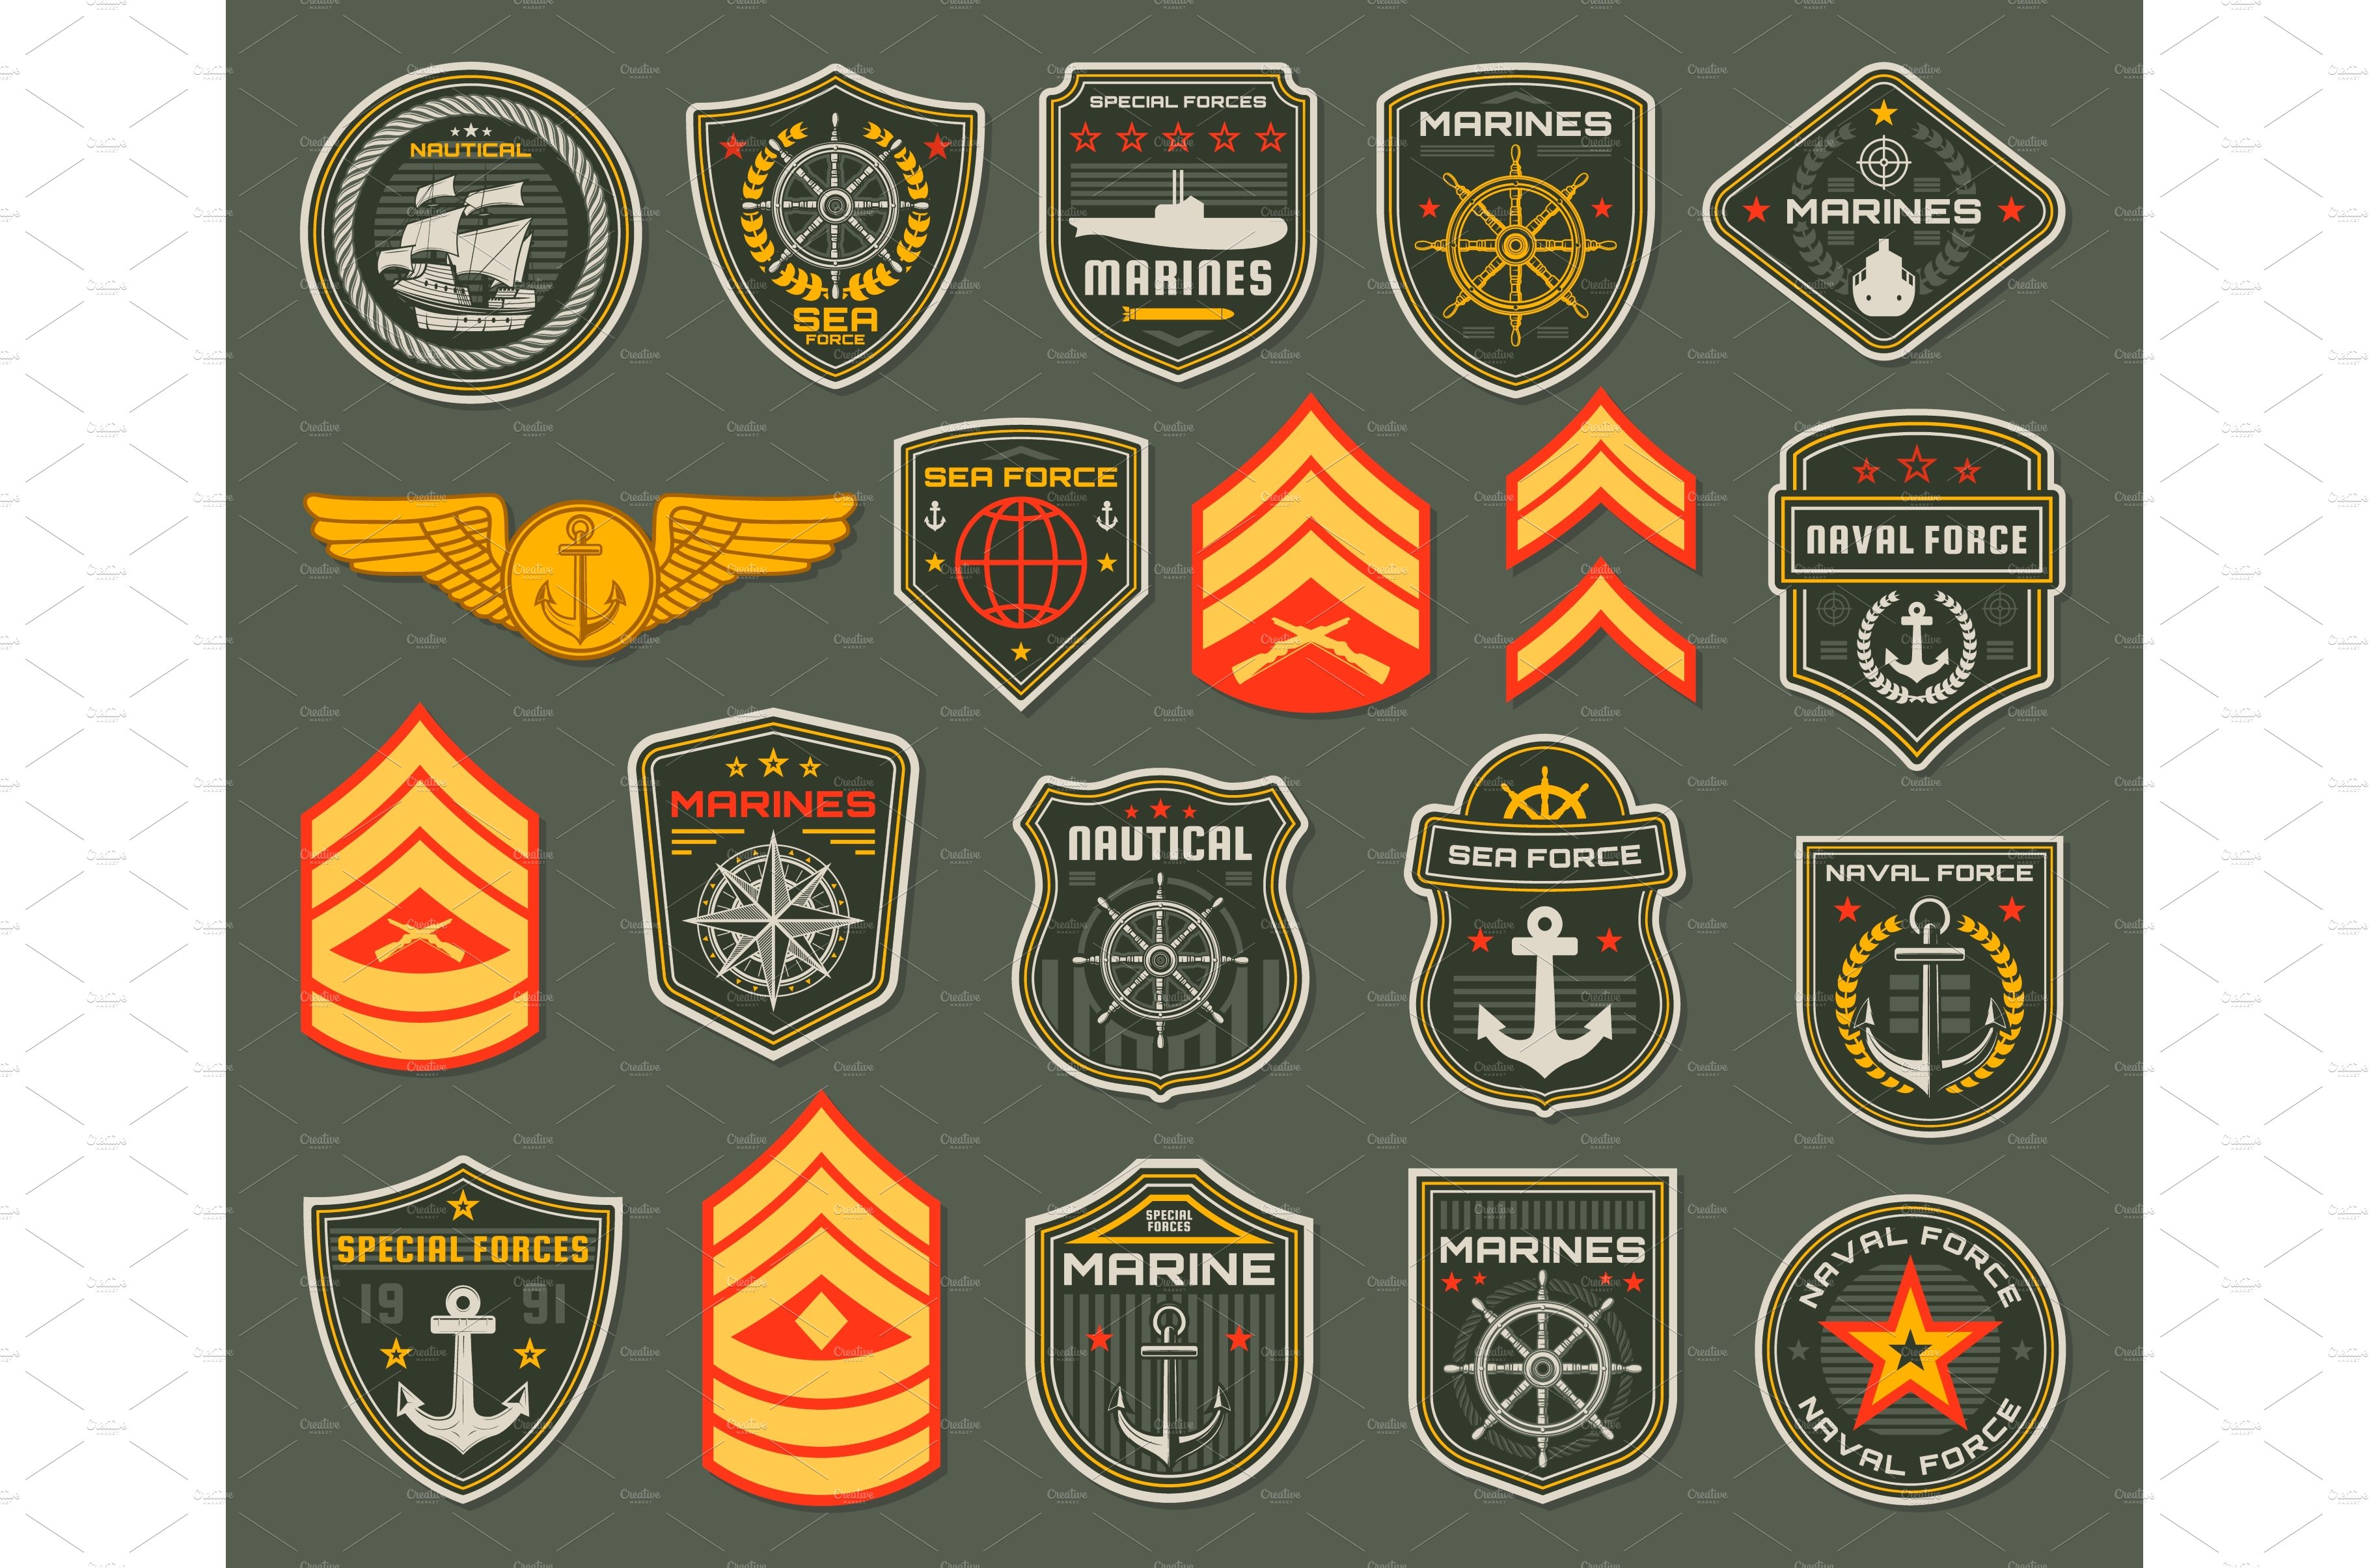 Army naval forces chevrons cover image.